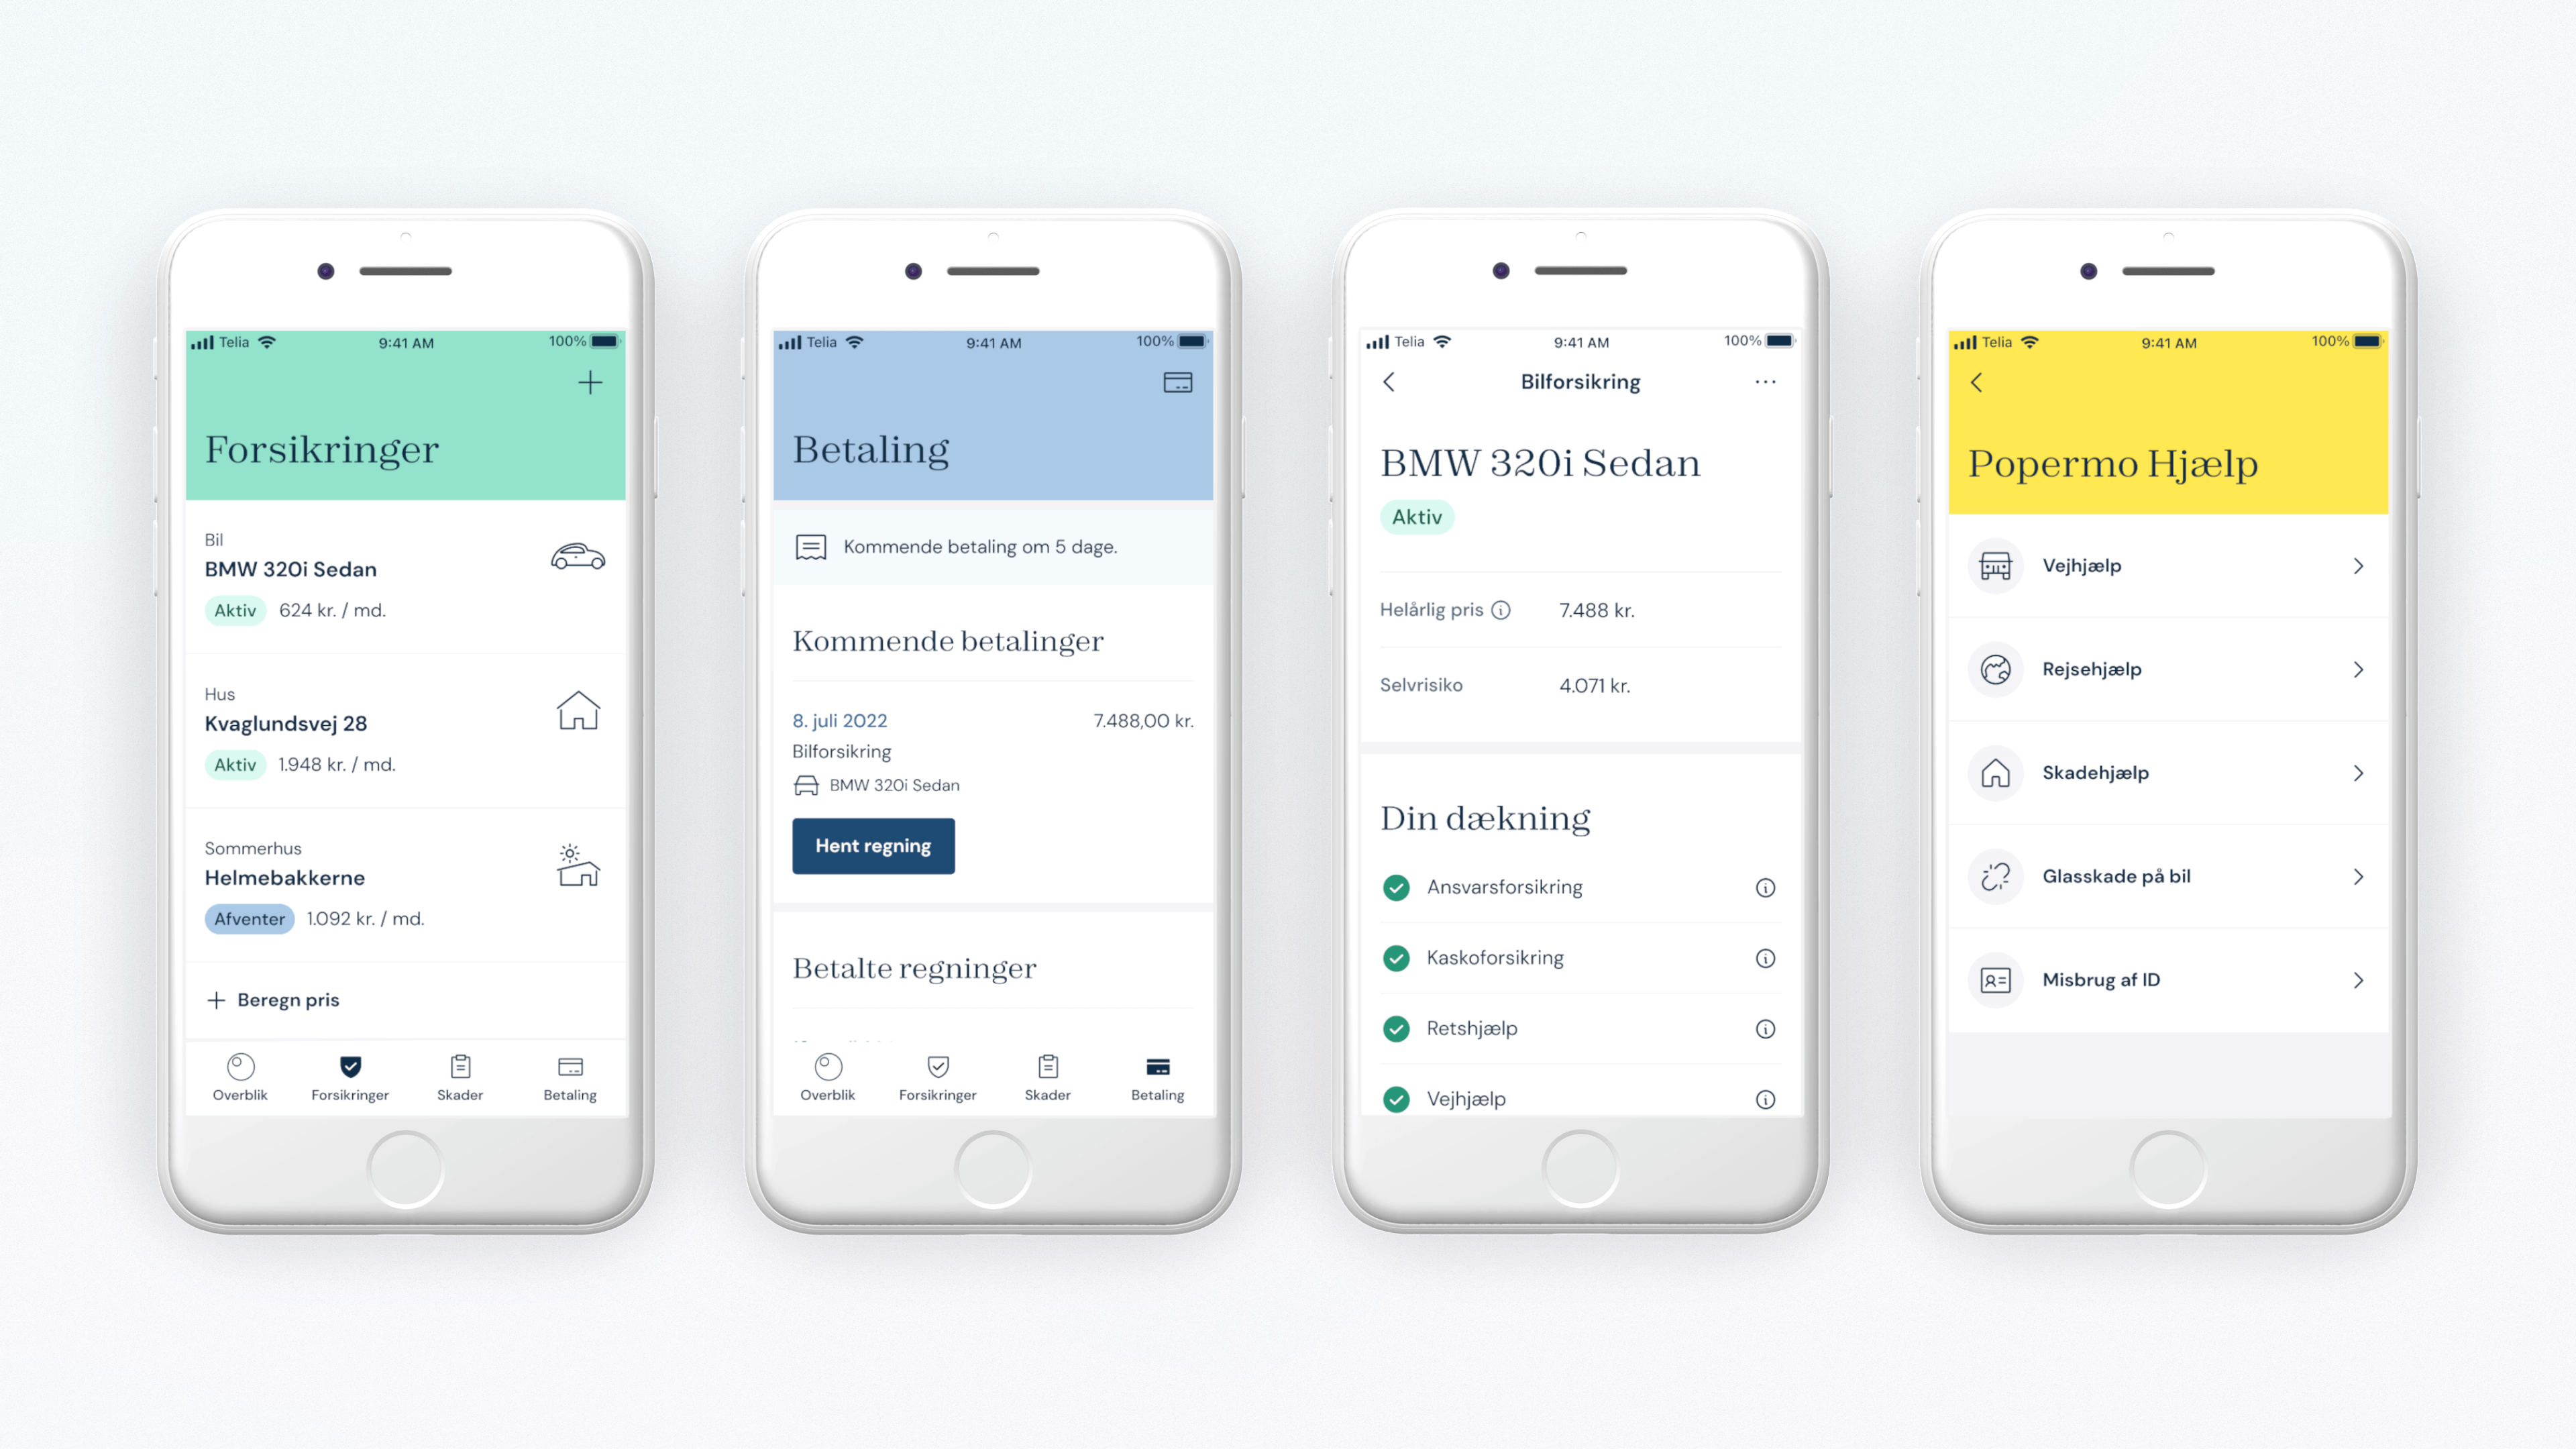 User interface for Popermo's insurance product.